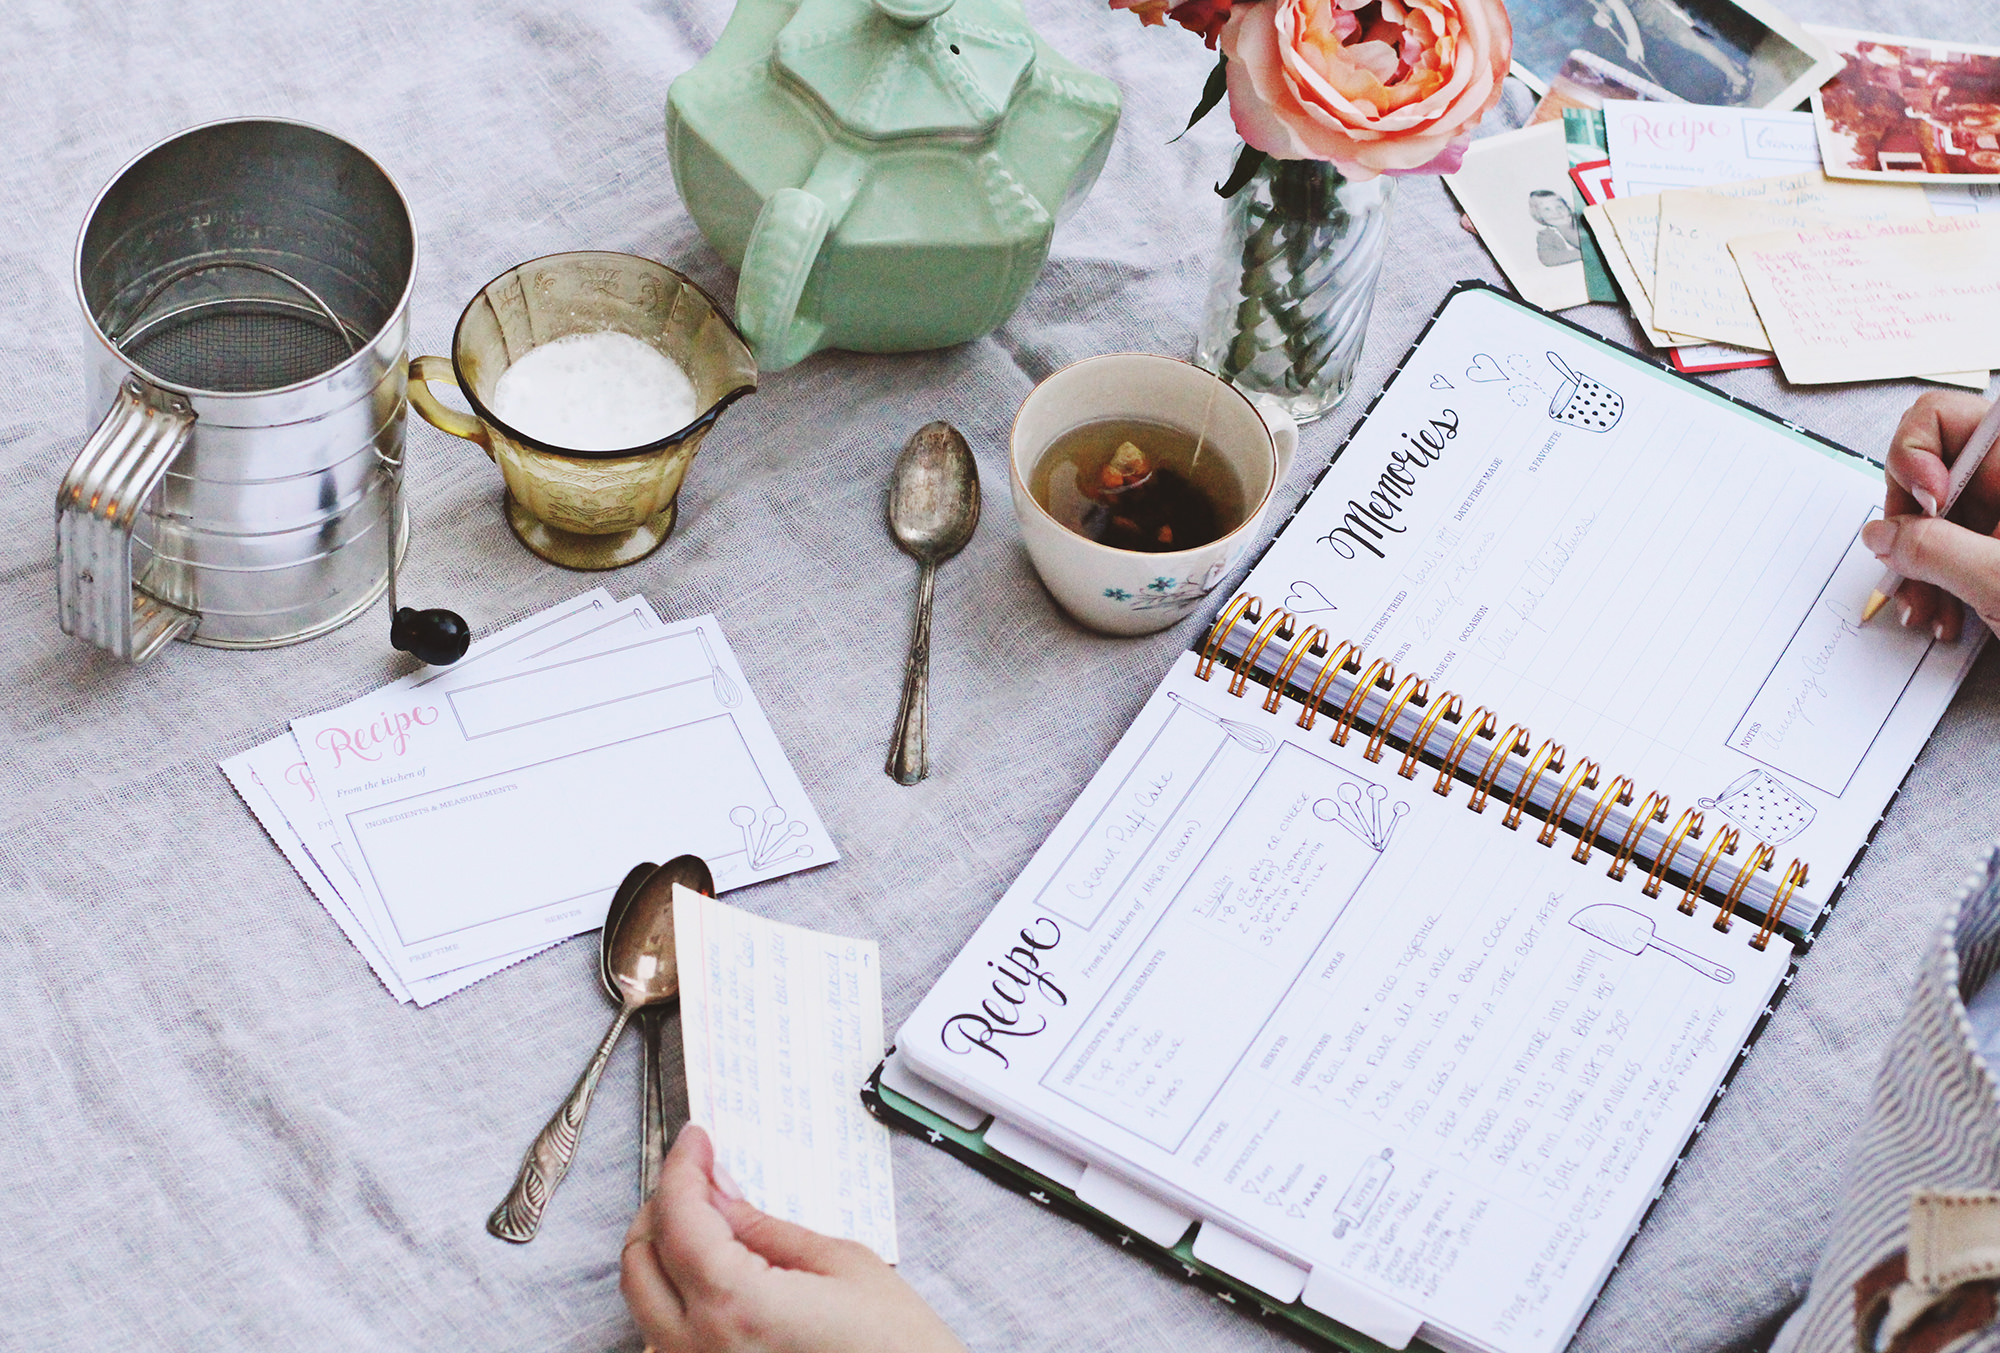 The Keepsake Kitchen Diary is a DIY recipe and Memory Keeper by Lily & Val.